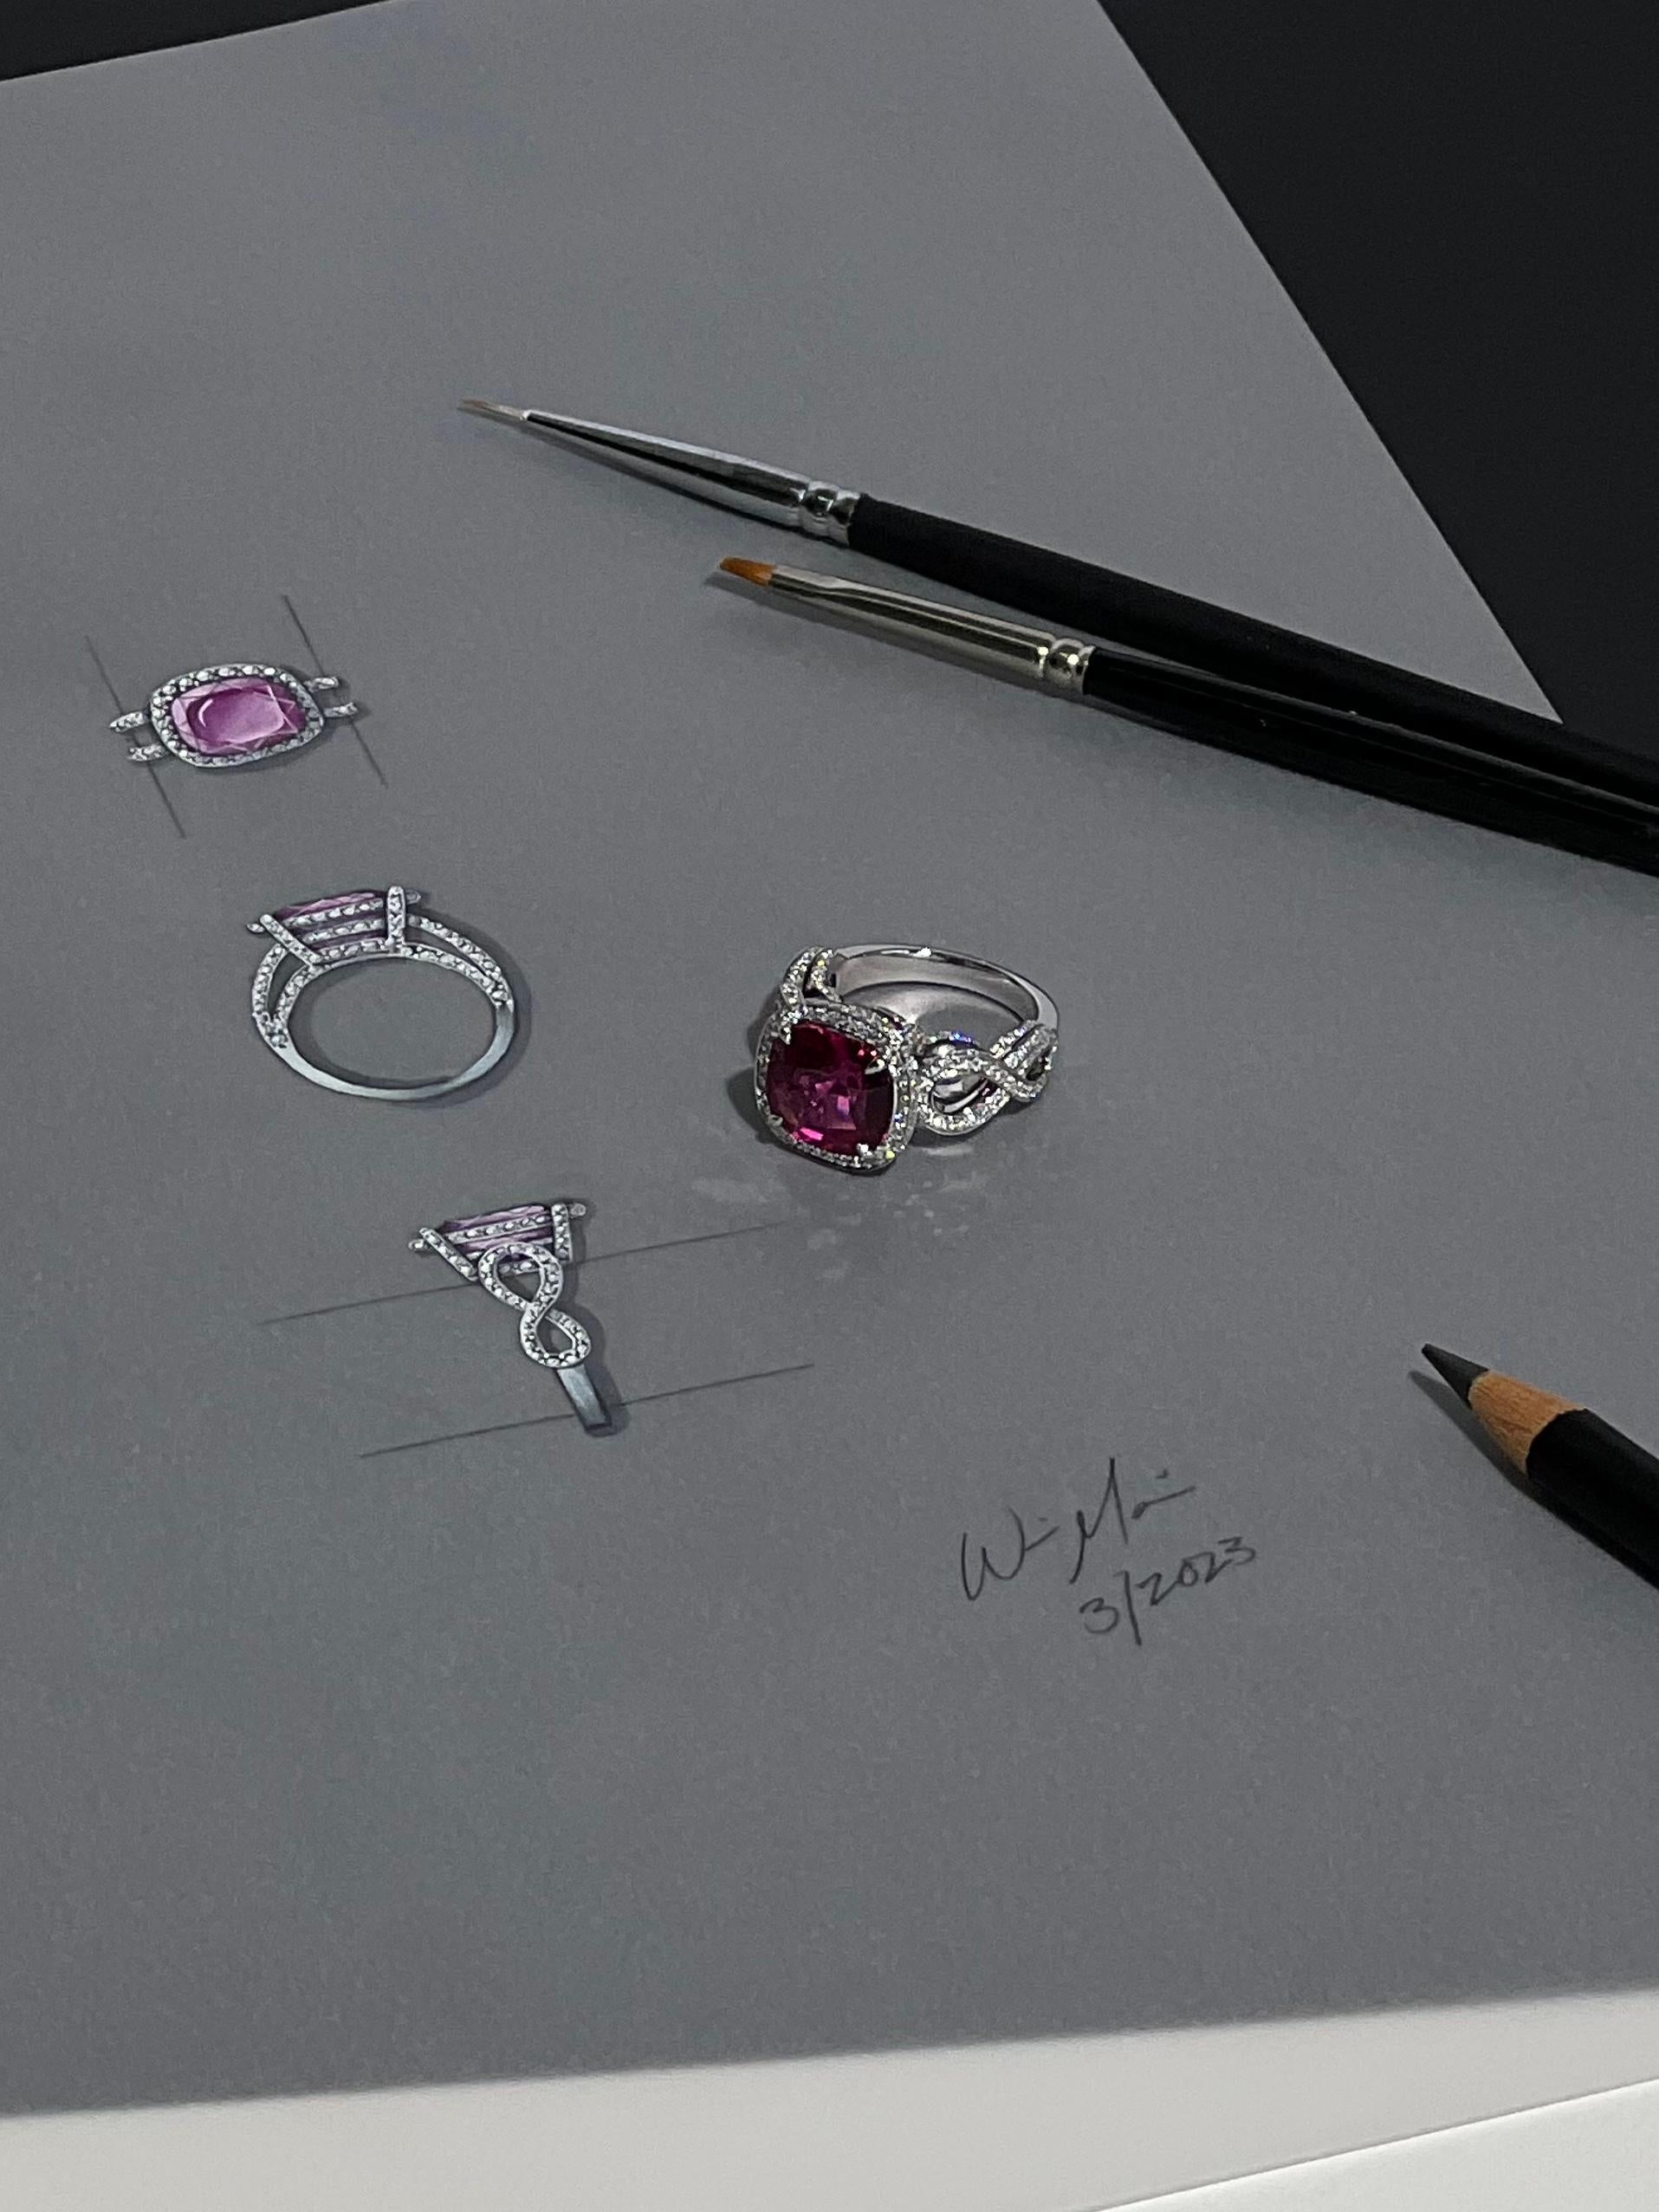 Cushion Cut 5.96 Carat Vibrant Magenta Rubellite Diamond Cocktail Ring in 18k White Gold  For Sale